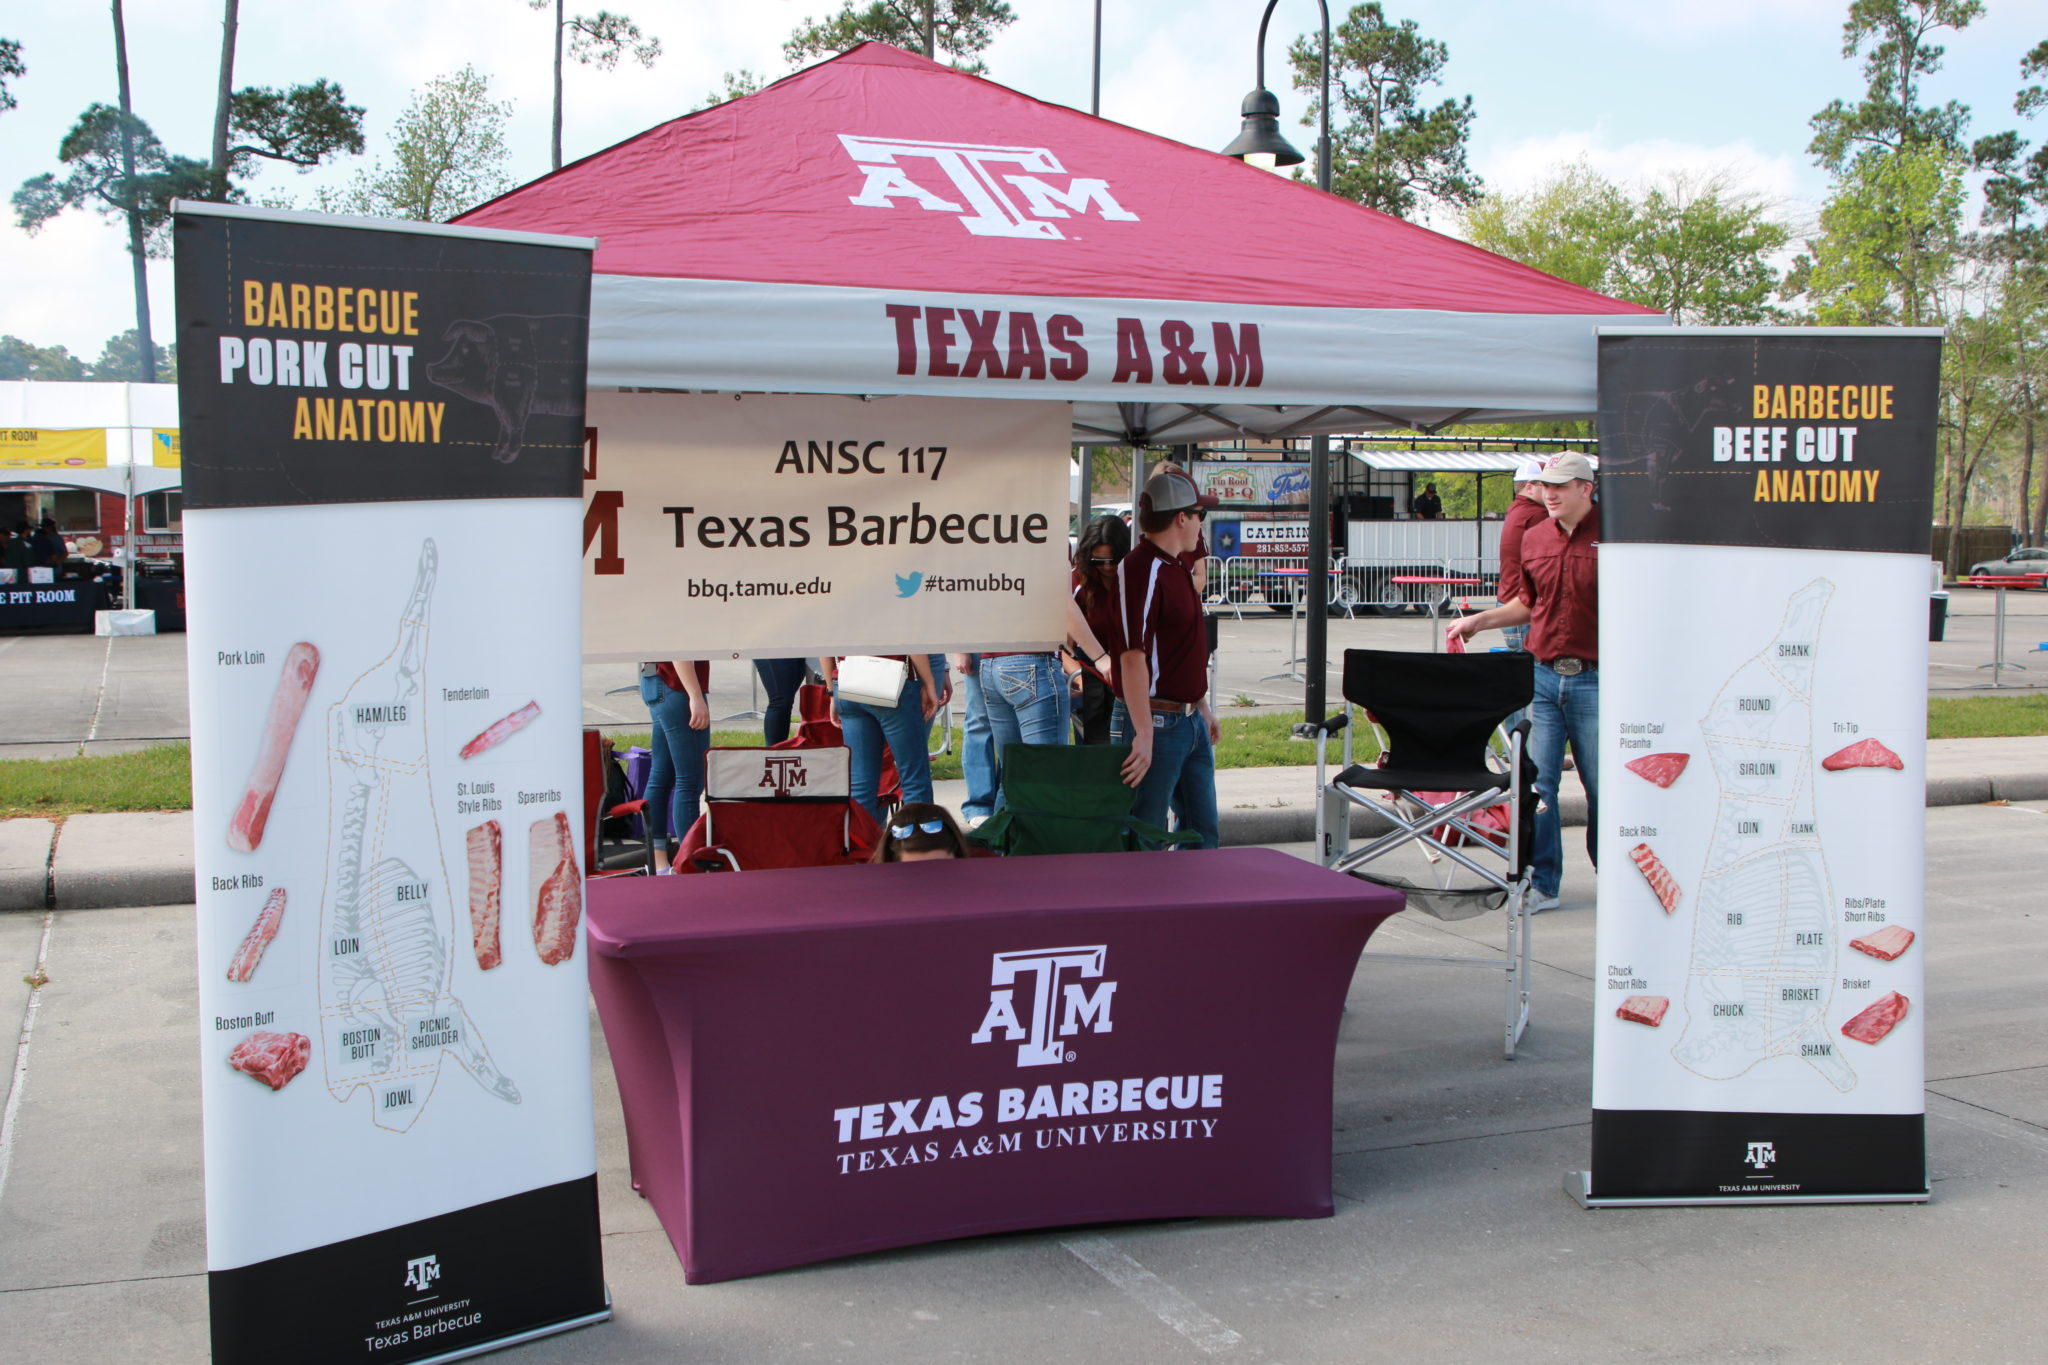 Texas A&M University Texas Barbecue program booth at the Houston BBQ Festival